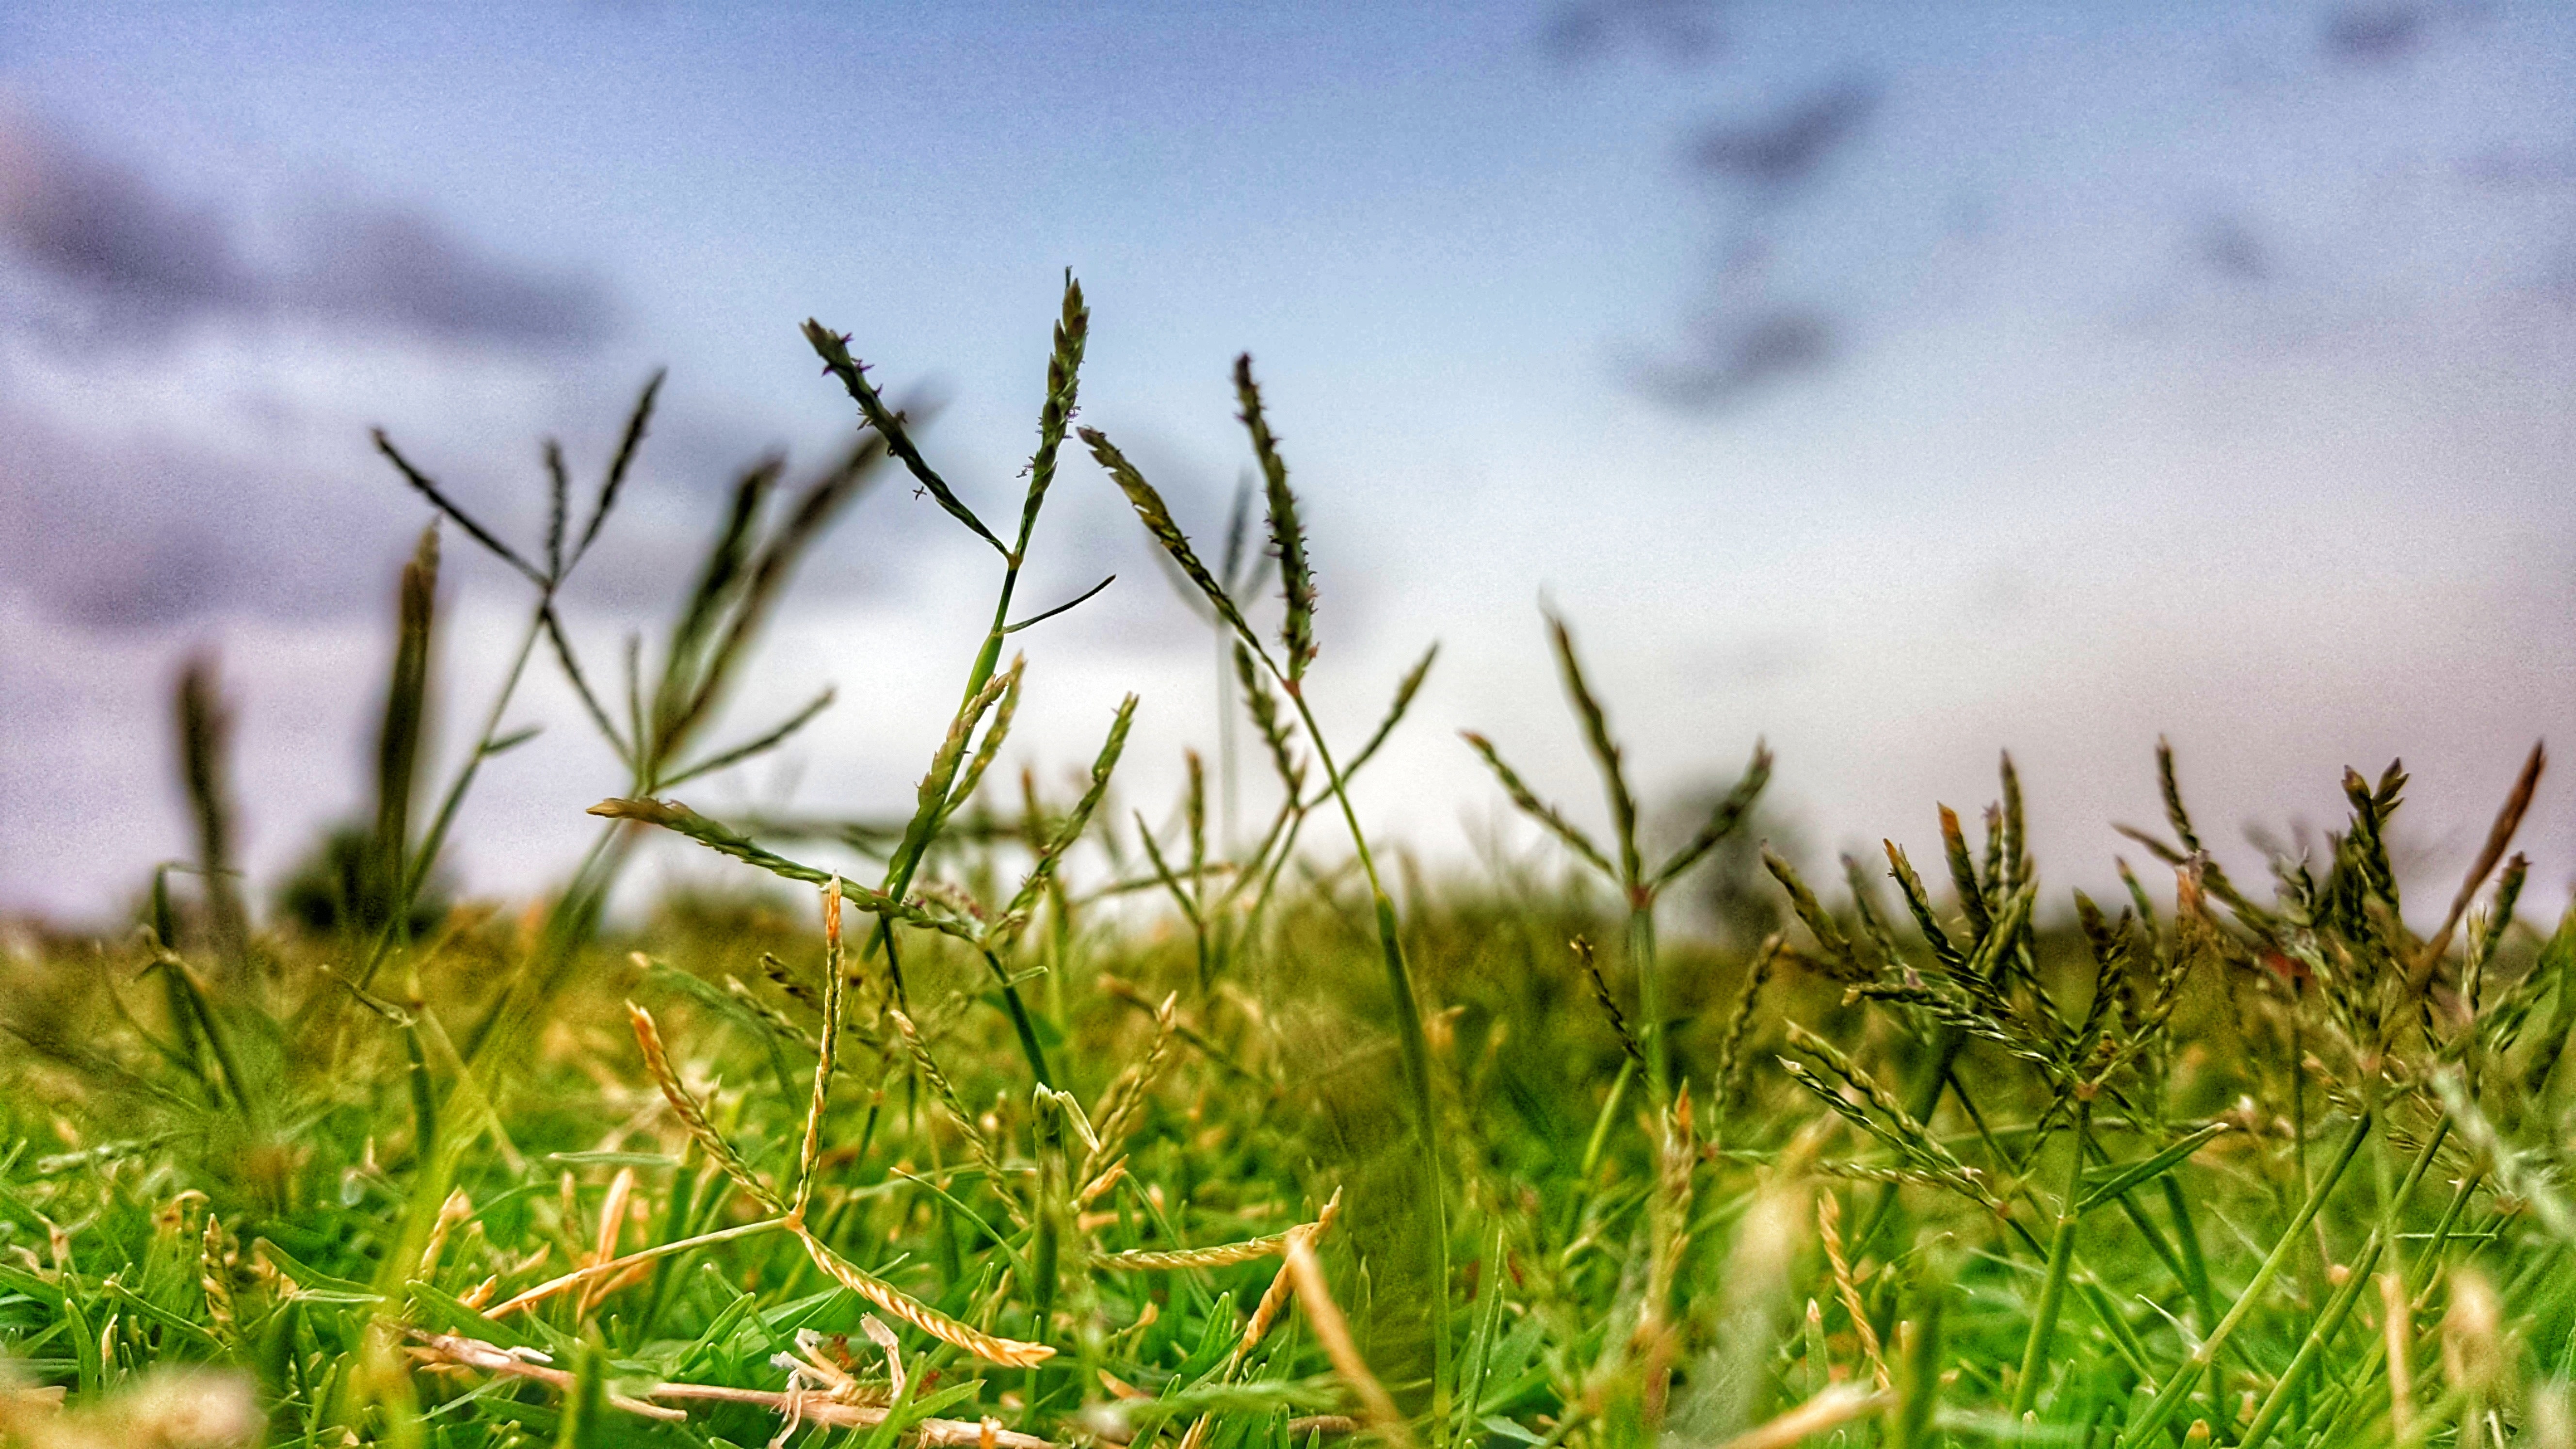 Close-up photography of grass